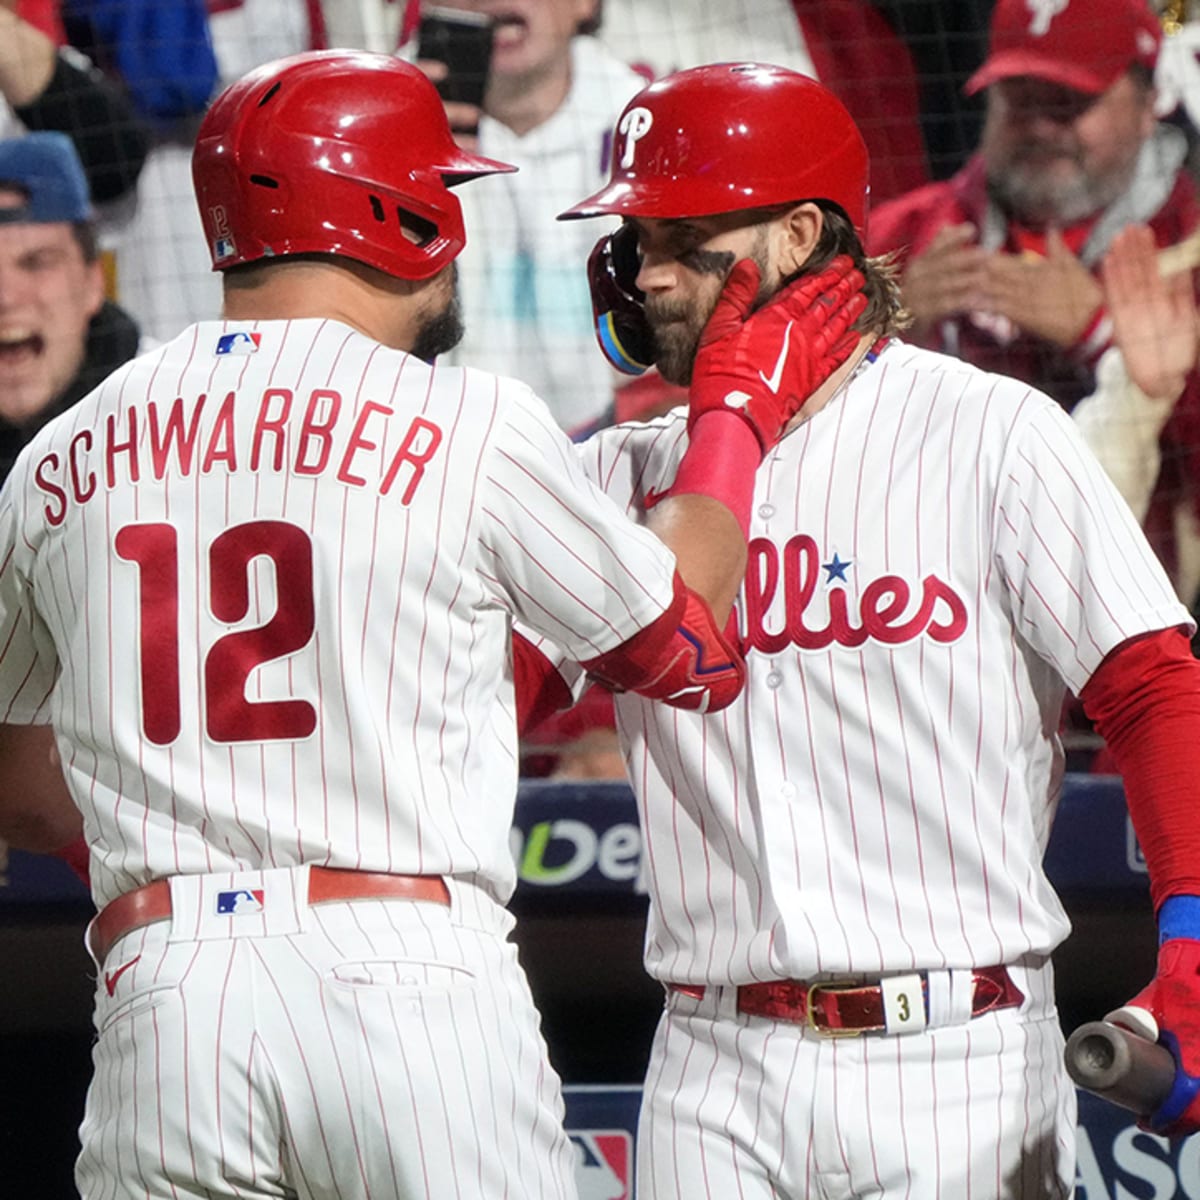 Kyle Schwarber and Bryce Harper hit home runs in the sixth inning against  the Diamondbacks